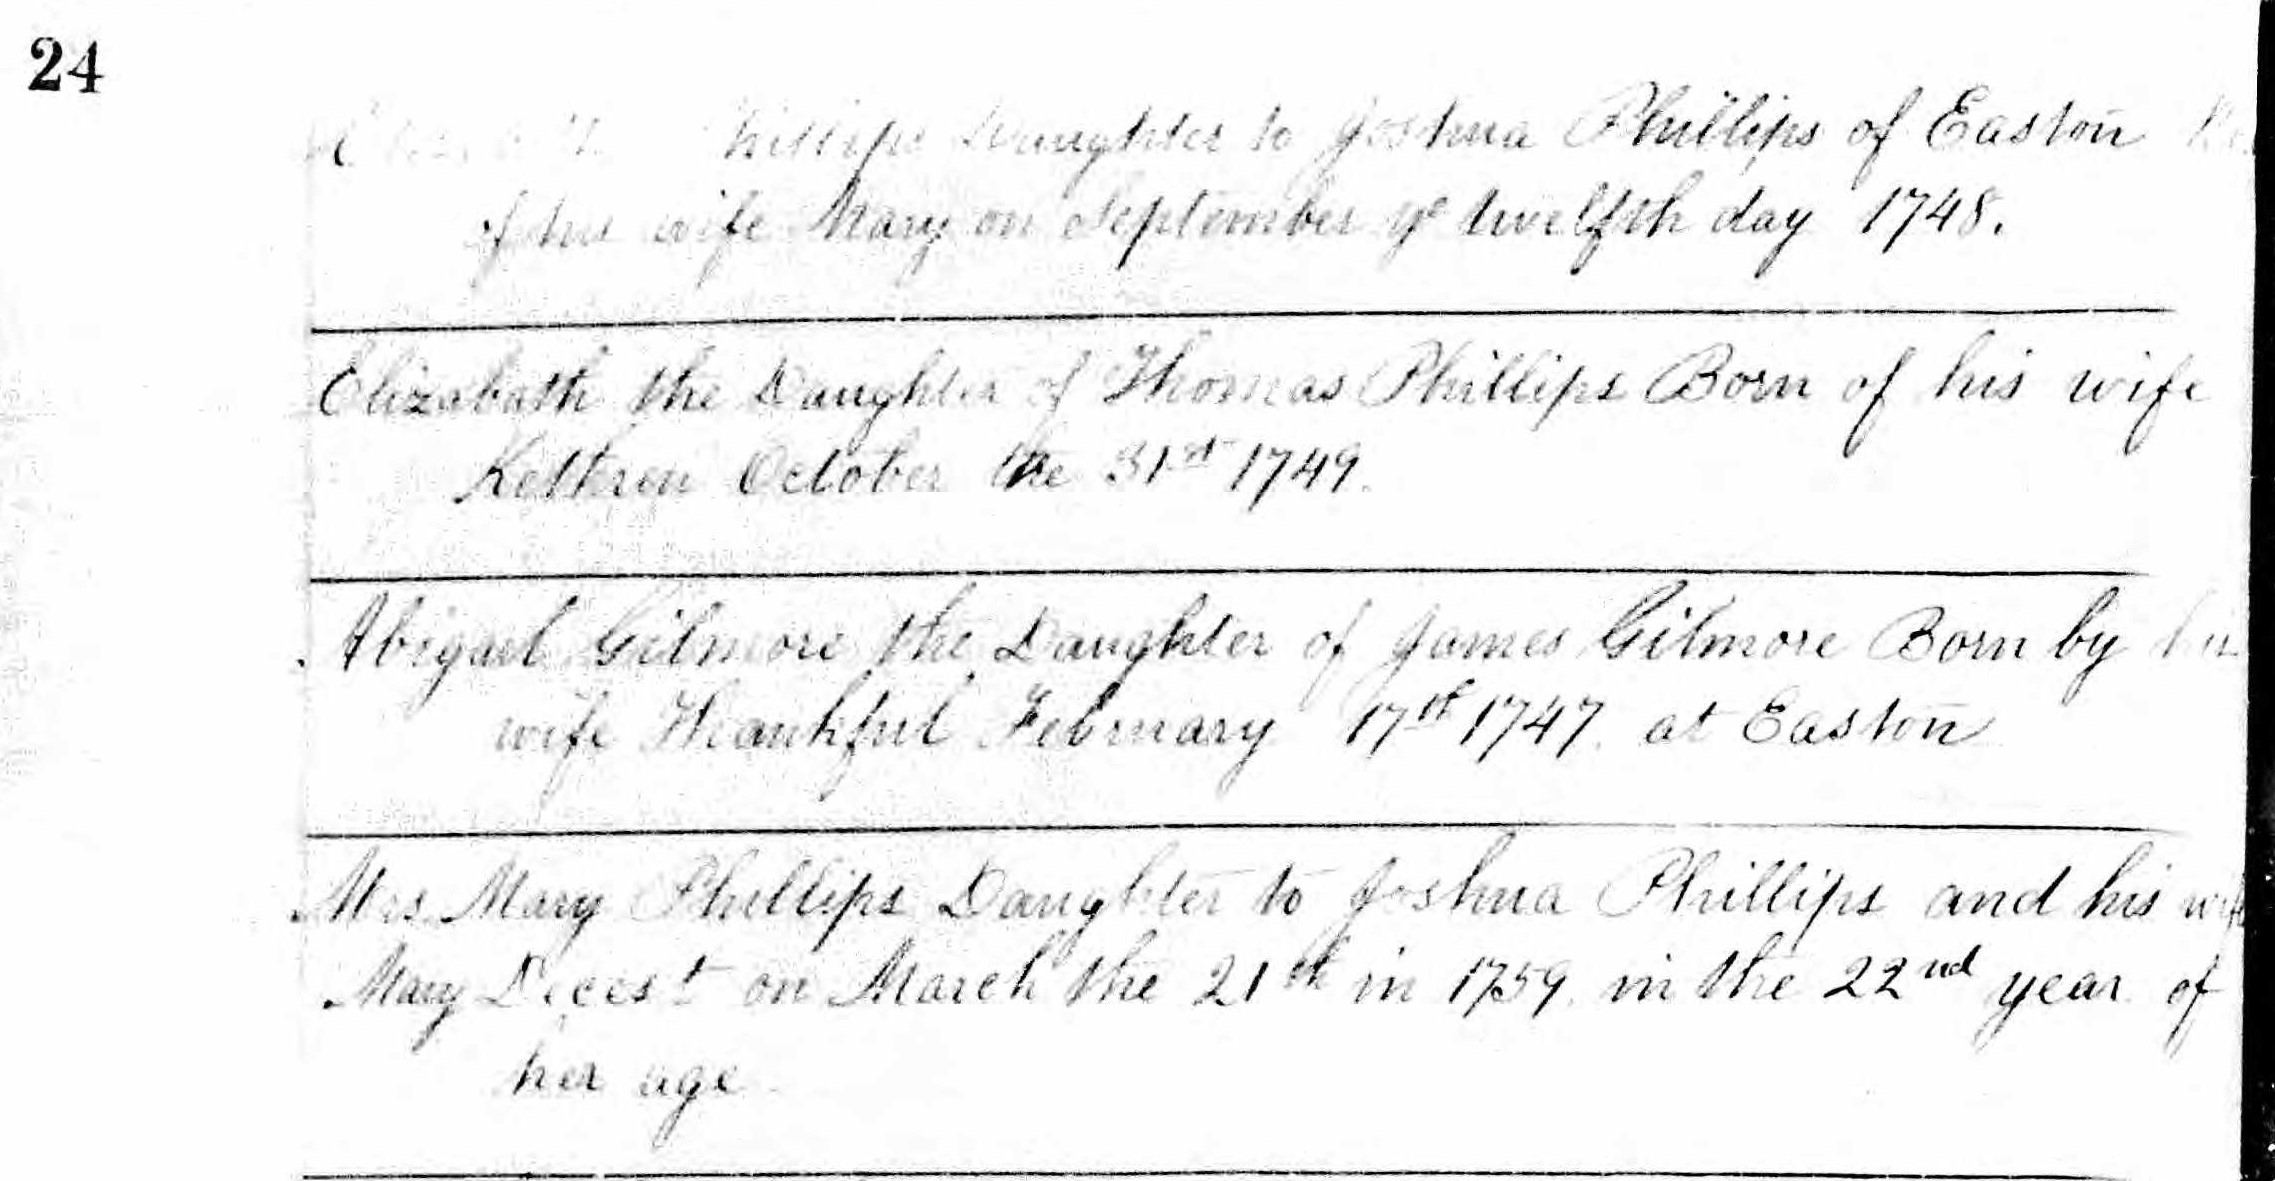 Family Registers of Joshua, Caleb, and Thomas Phillips' families, page 2